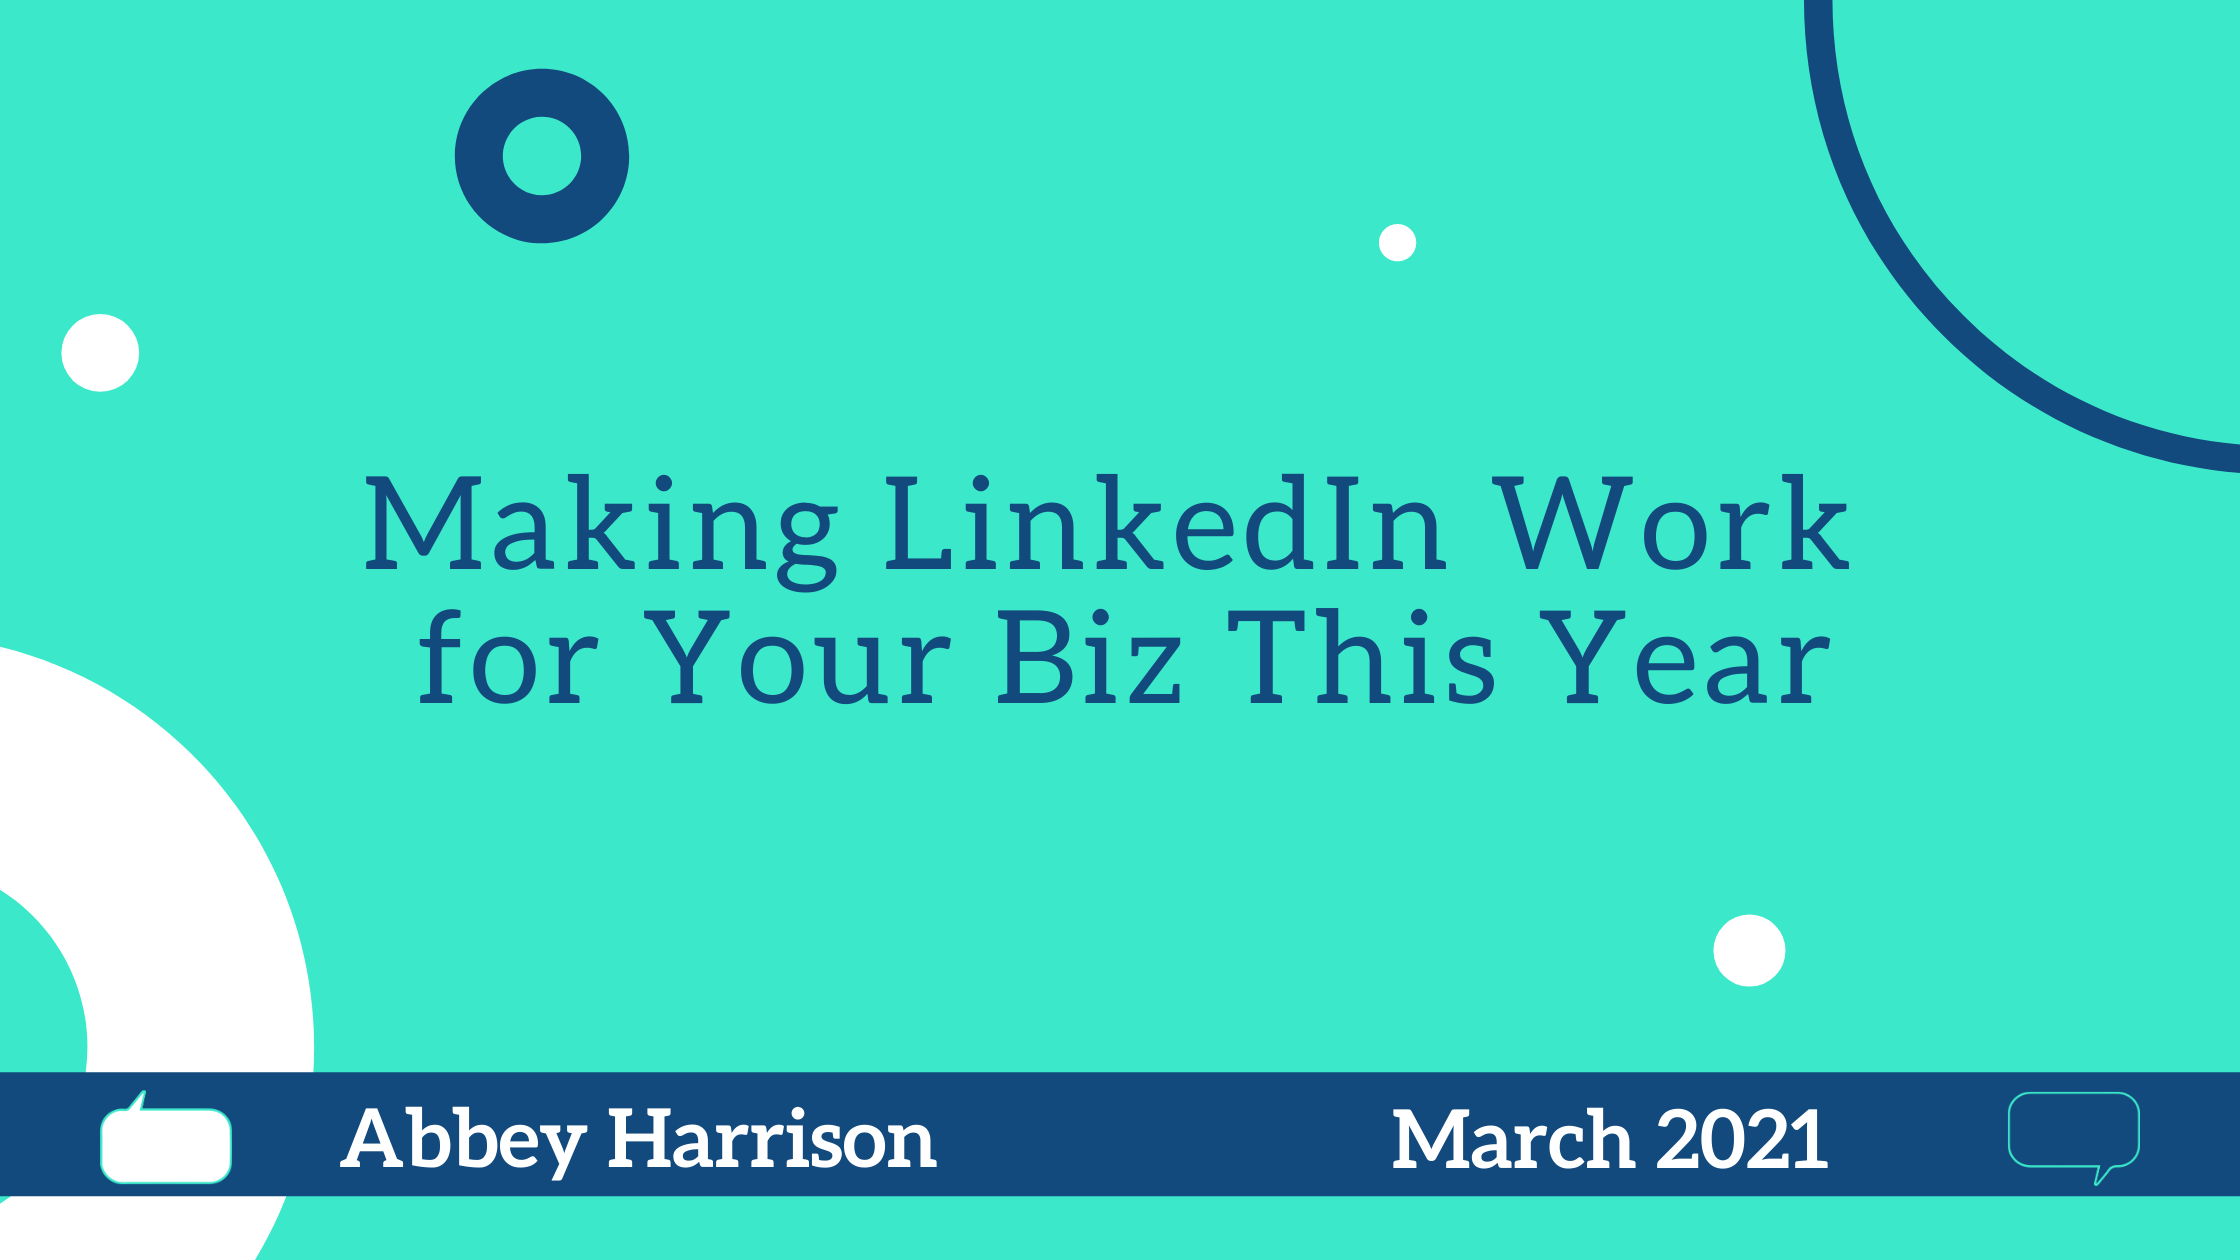 Making LinkedIn Work for Your Biz This Year